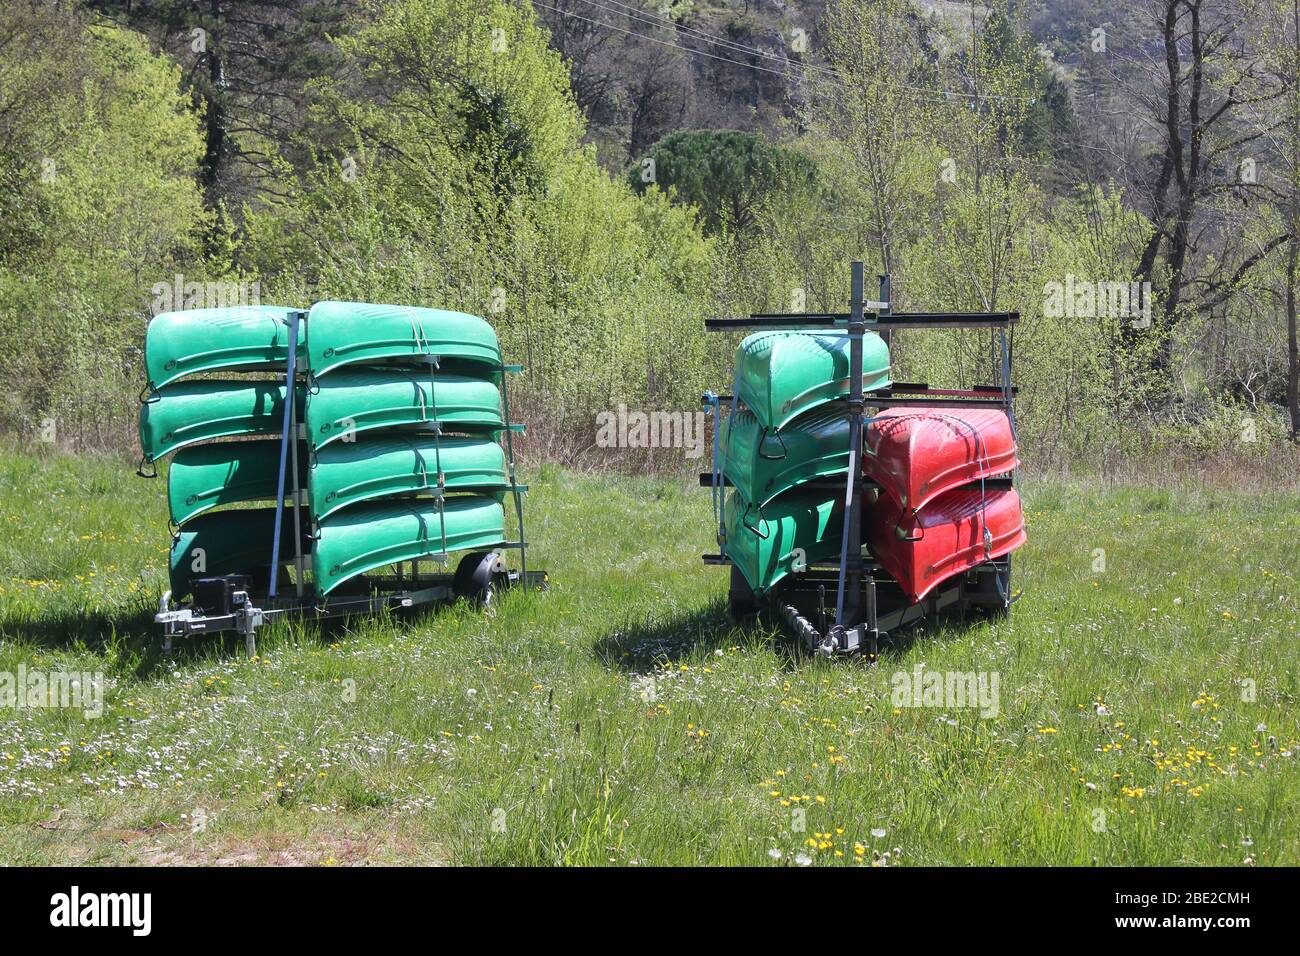 Green and red canoes stacked on two trailers Stock Photo